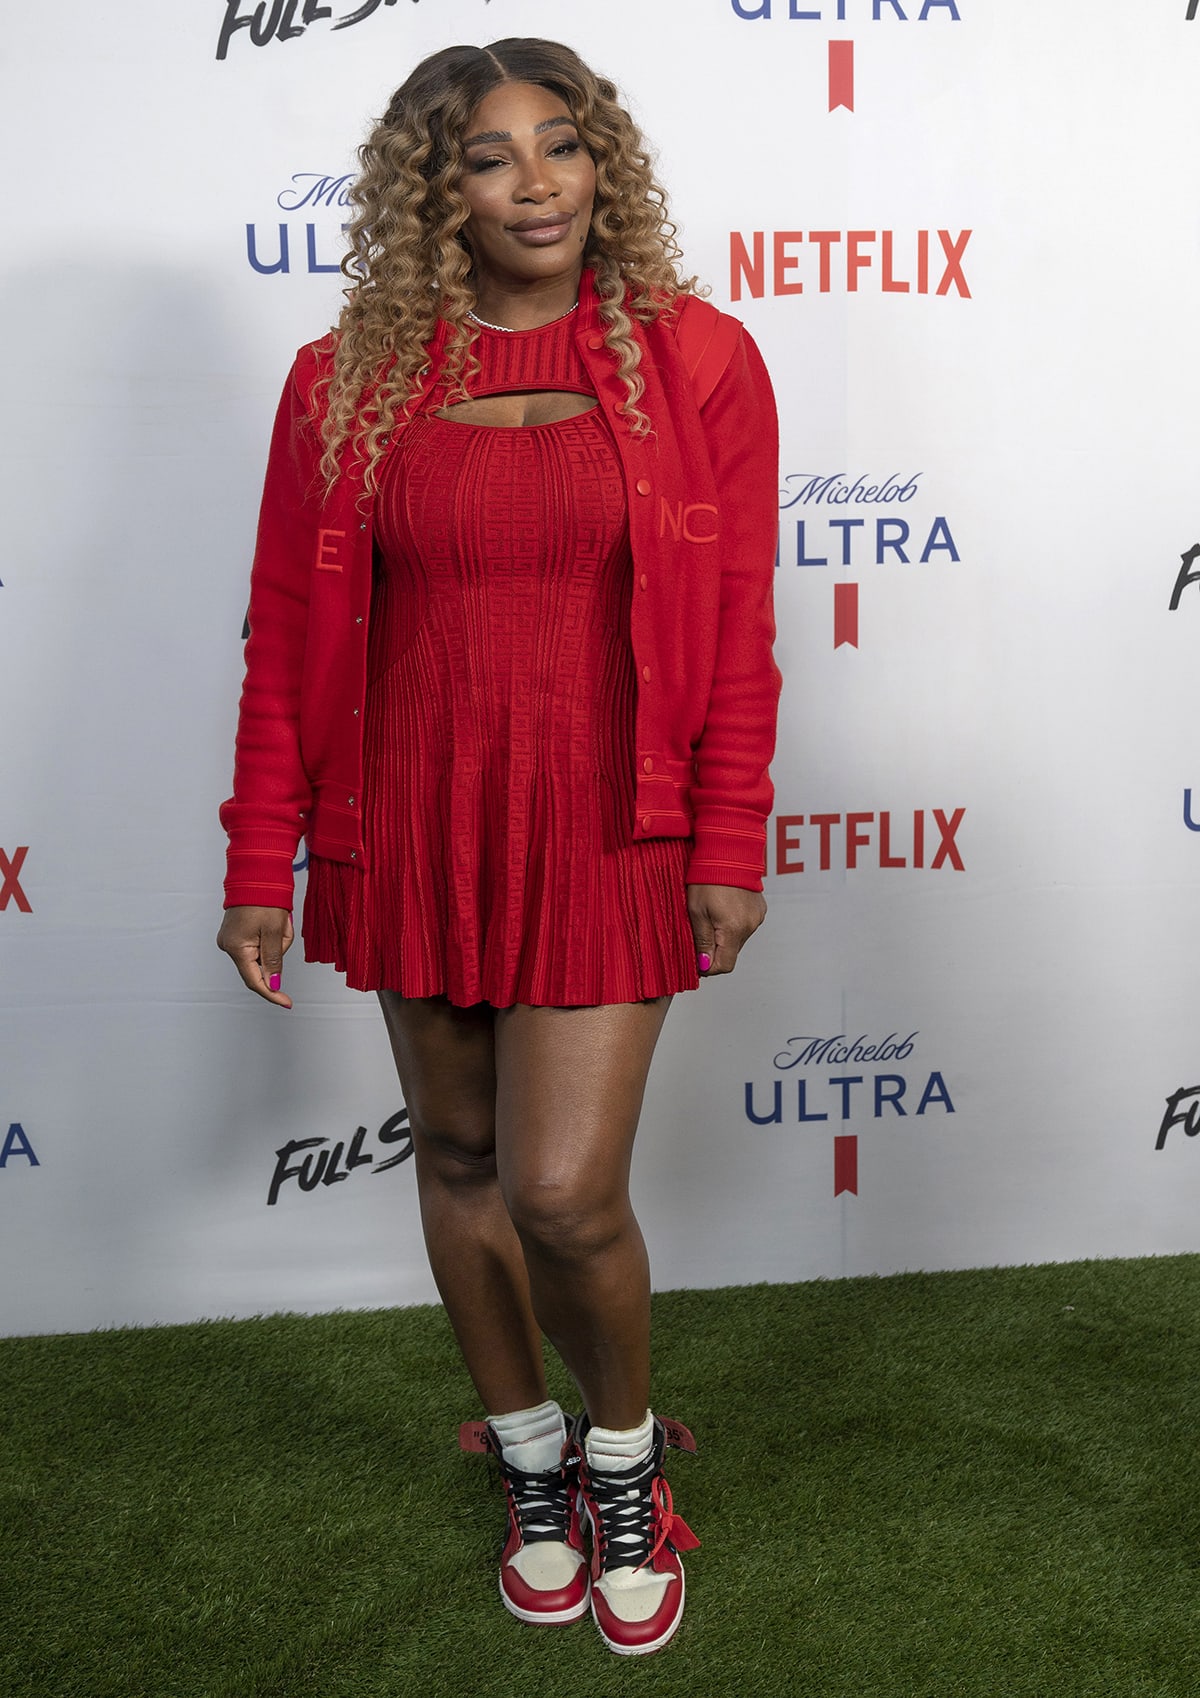 Serena Williams showcases her athletic body in a red minidress with a matching unbuttoned red sweater and white-and-red Jordan high-top sneakers